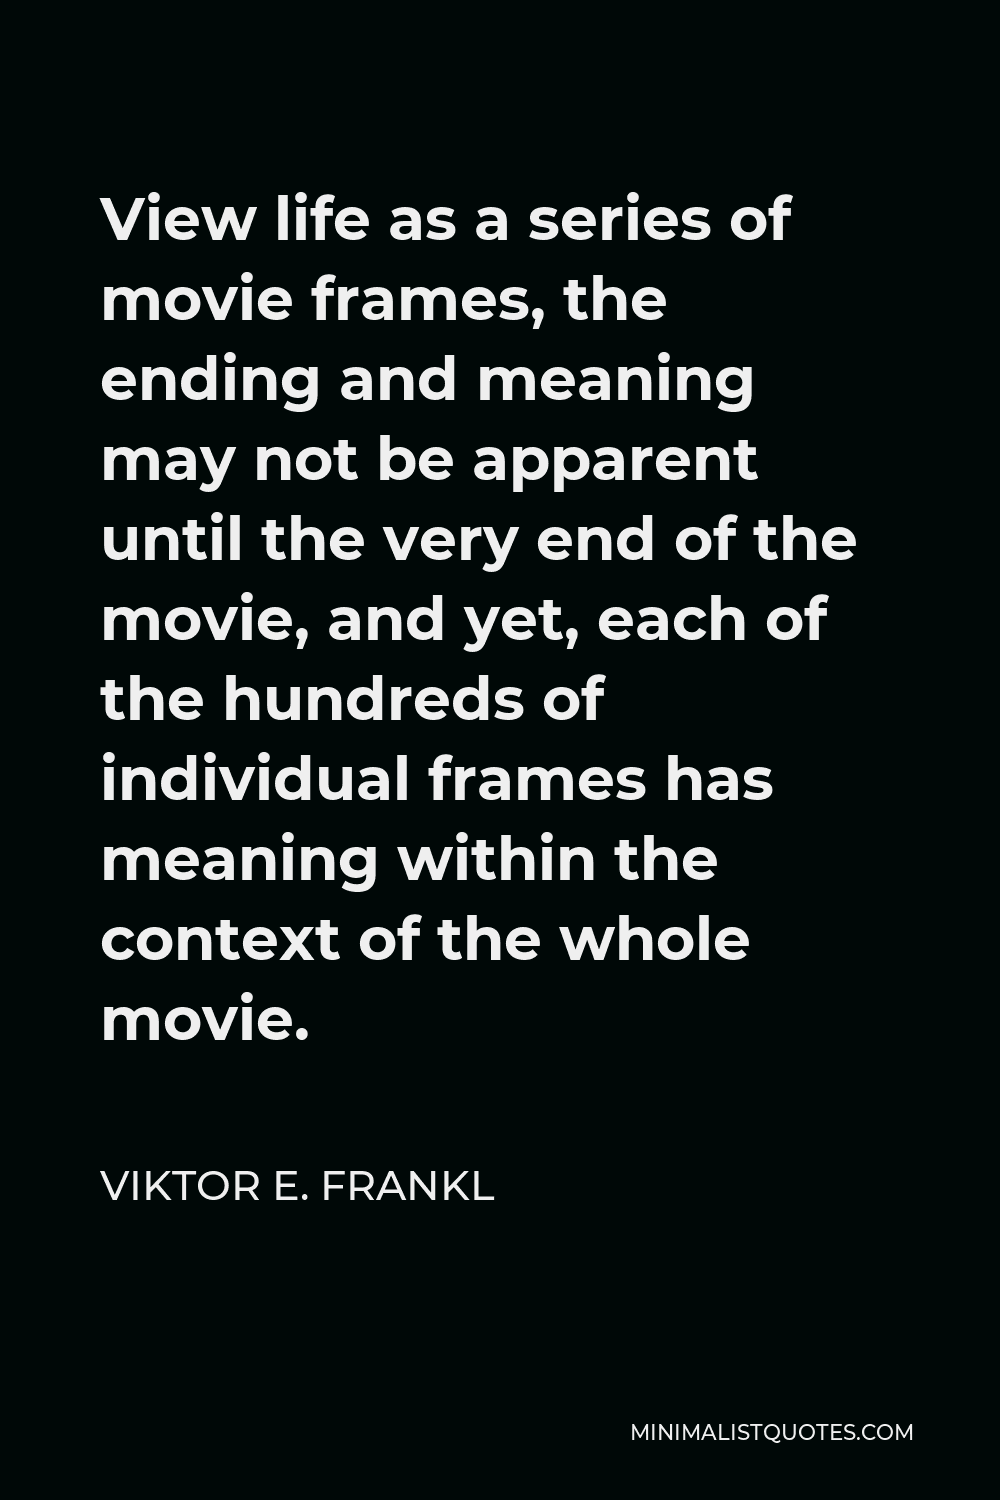 Viktor E. Frankl Quote - View life as a series of movie frames, the ending and meaning may not be apparent until the very end of the movie, and yet, each of the hundreds of individual frames has meaning within the context of the whole movie.